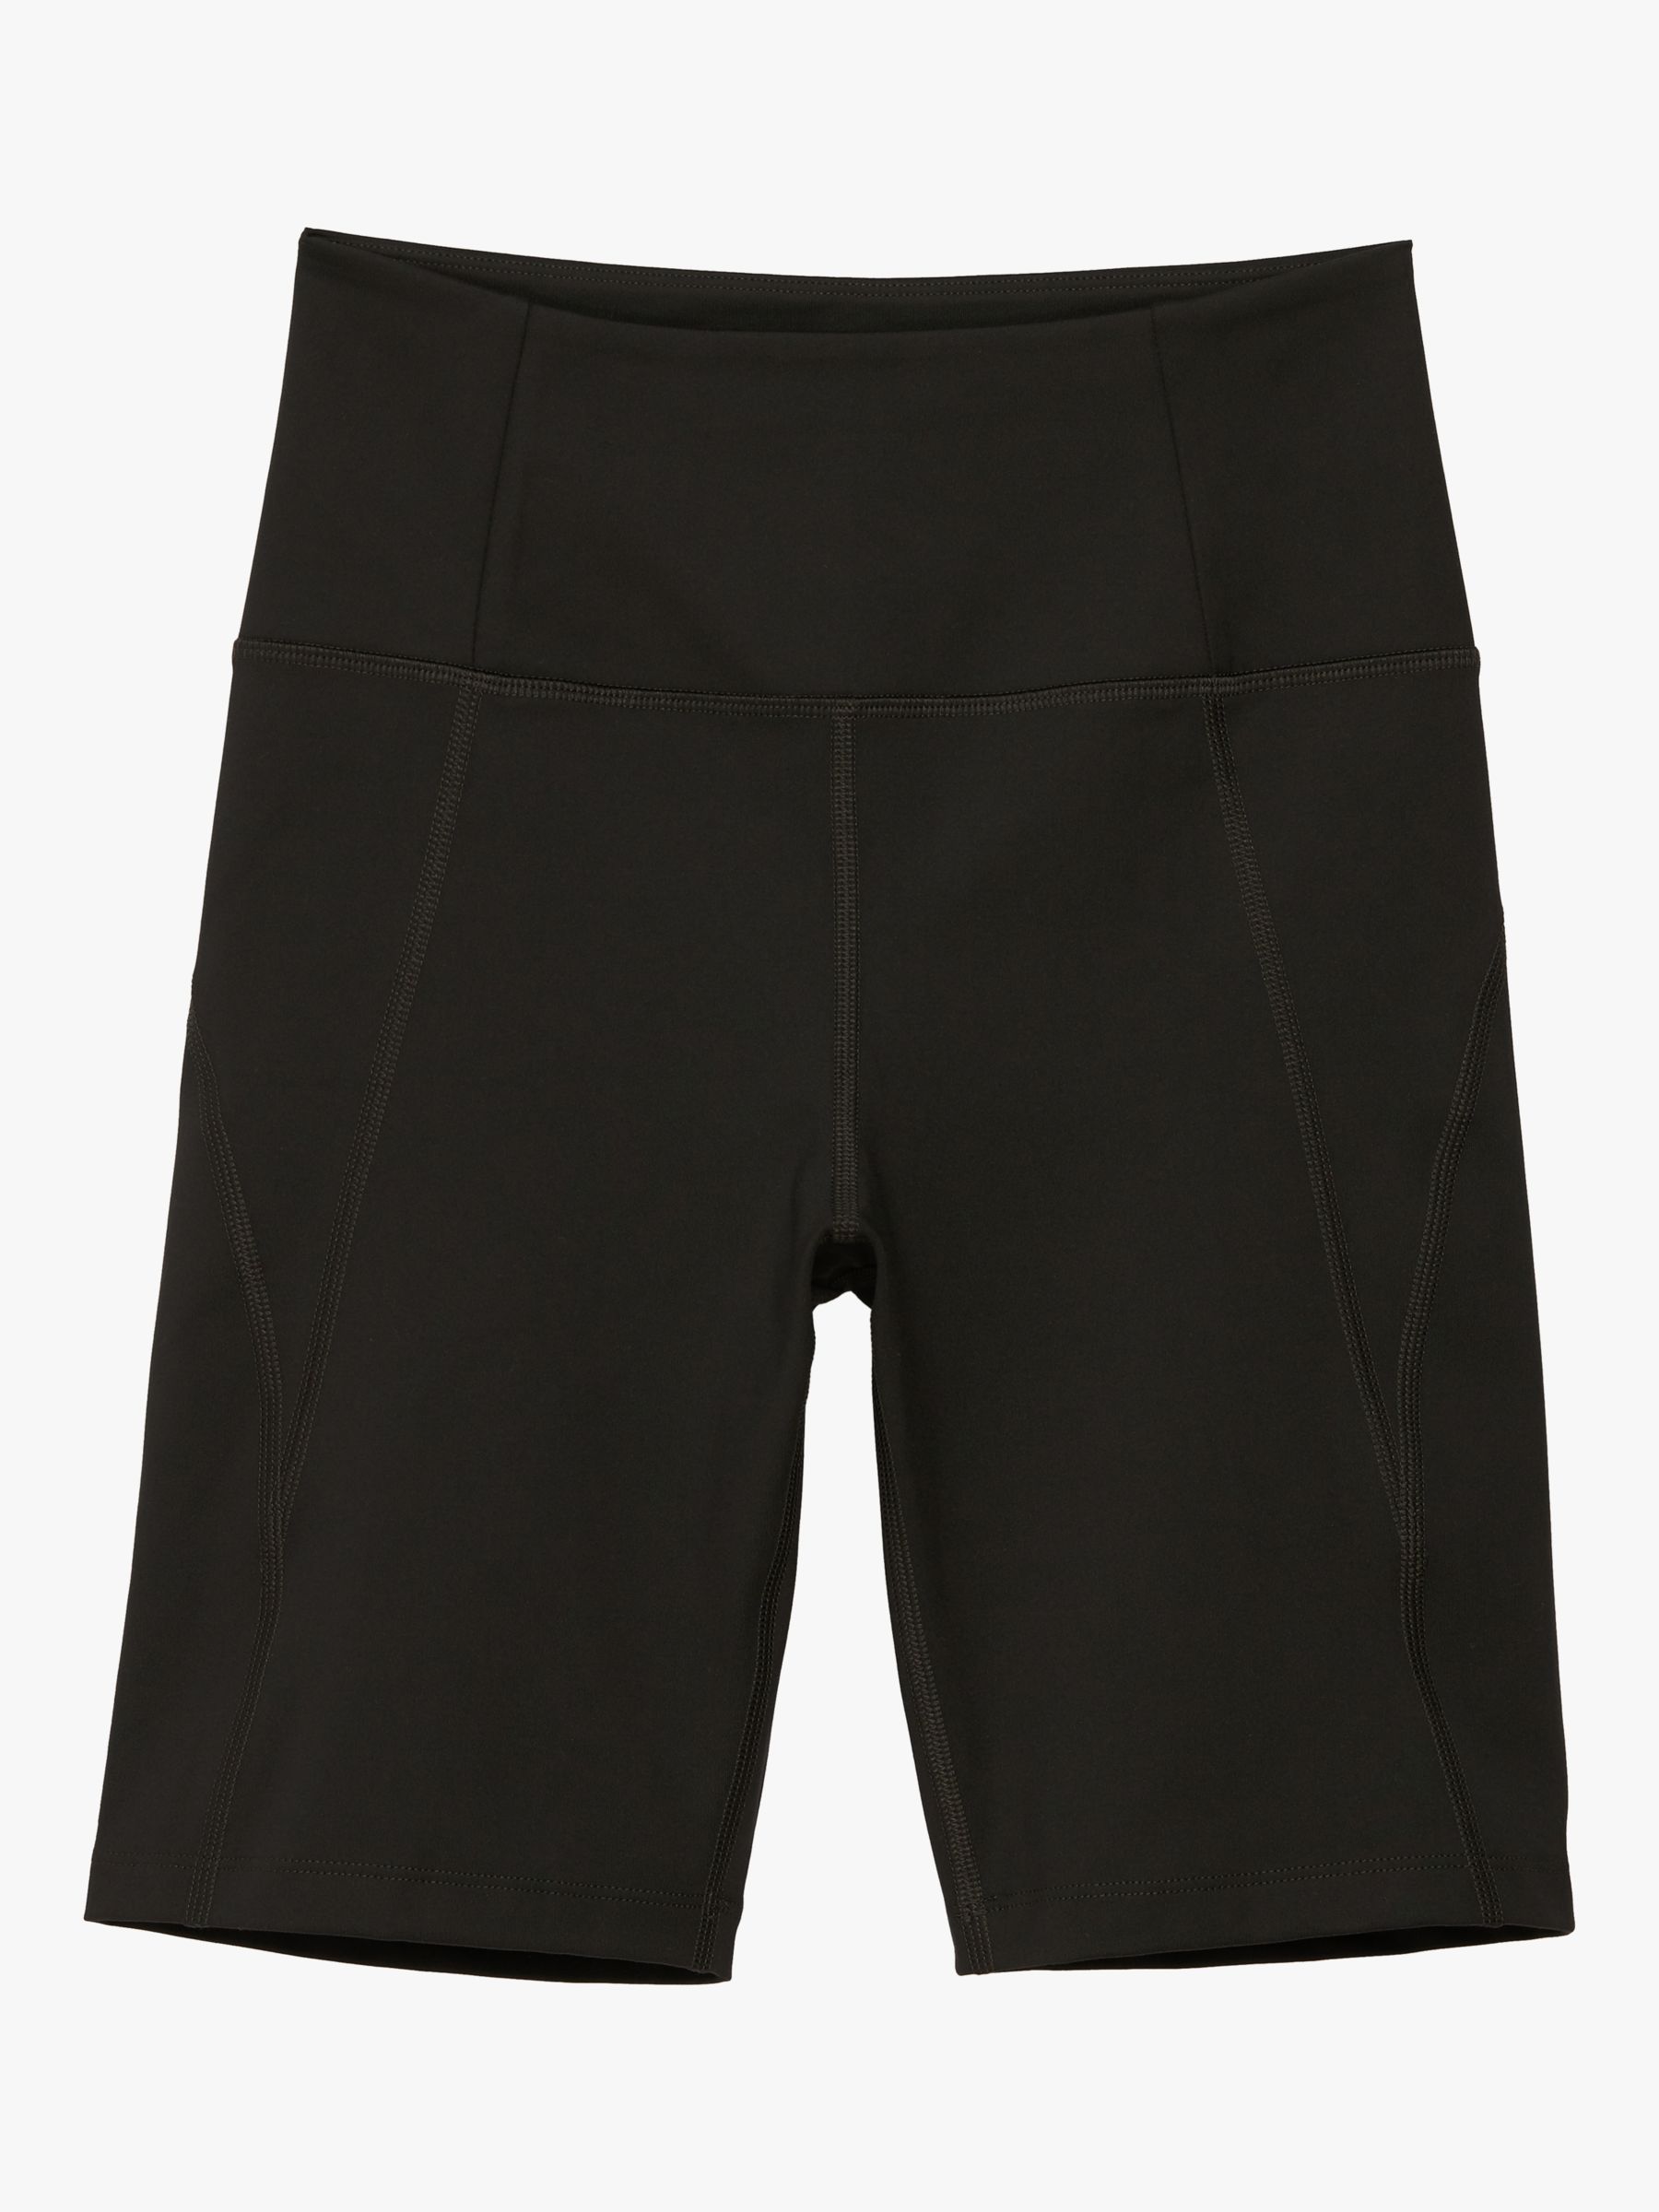 Buy Girlfriend Collective High Rise Bike Shorts Online at johnlewis.com